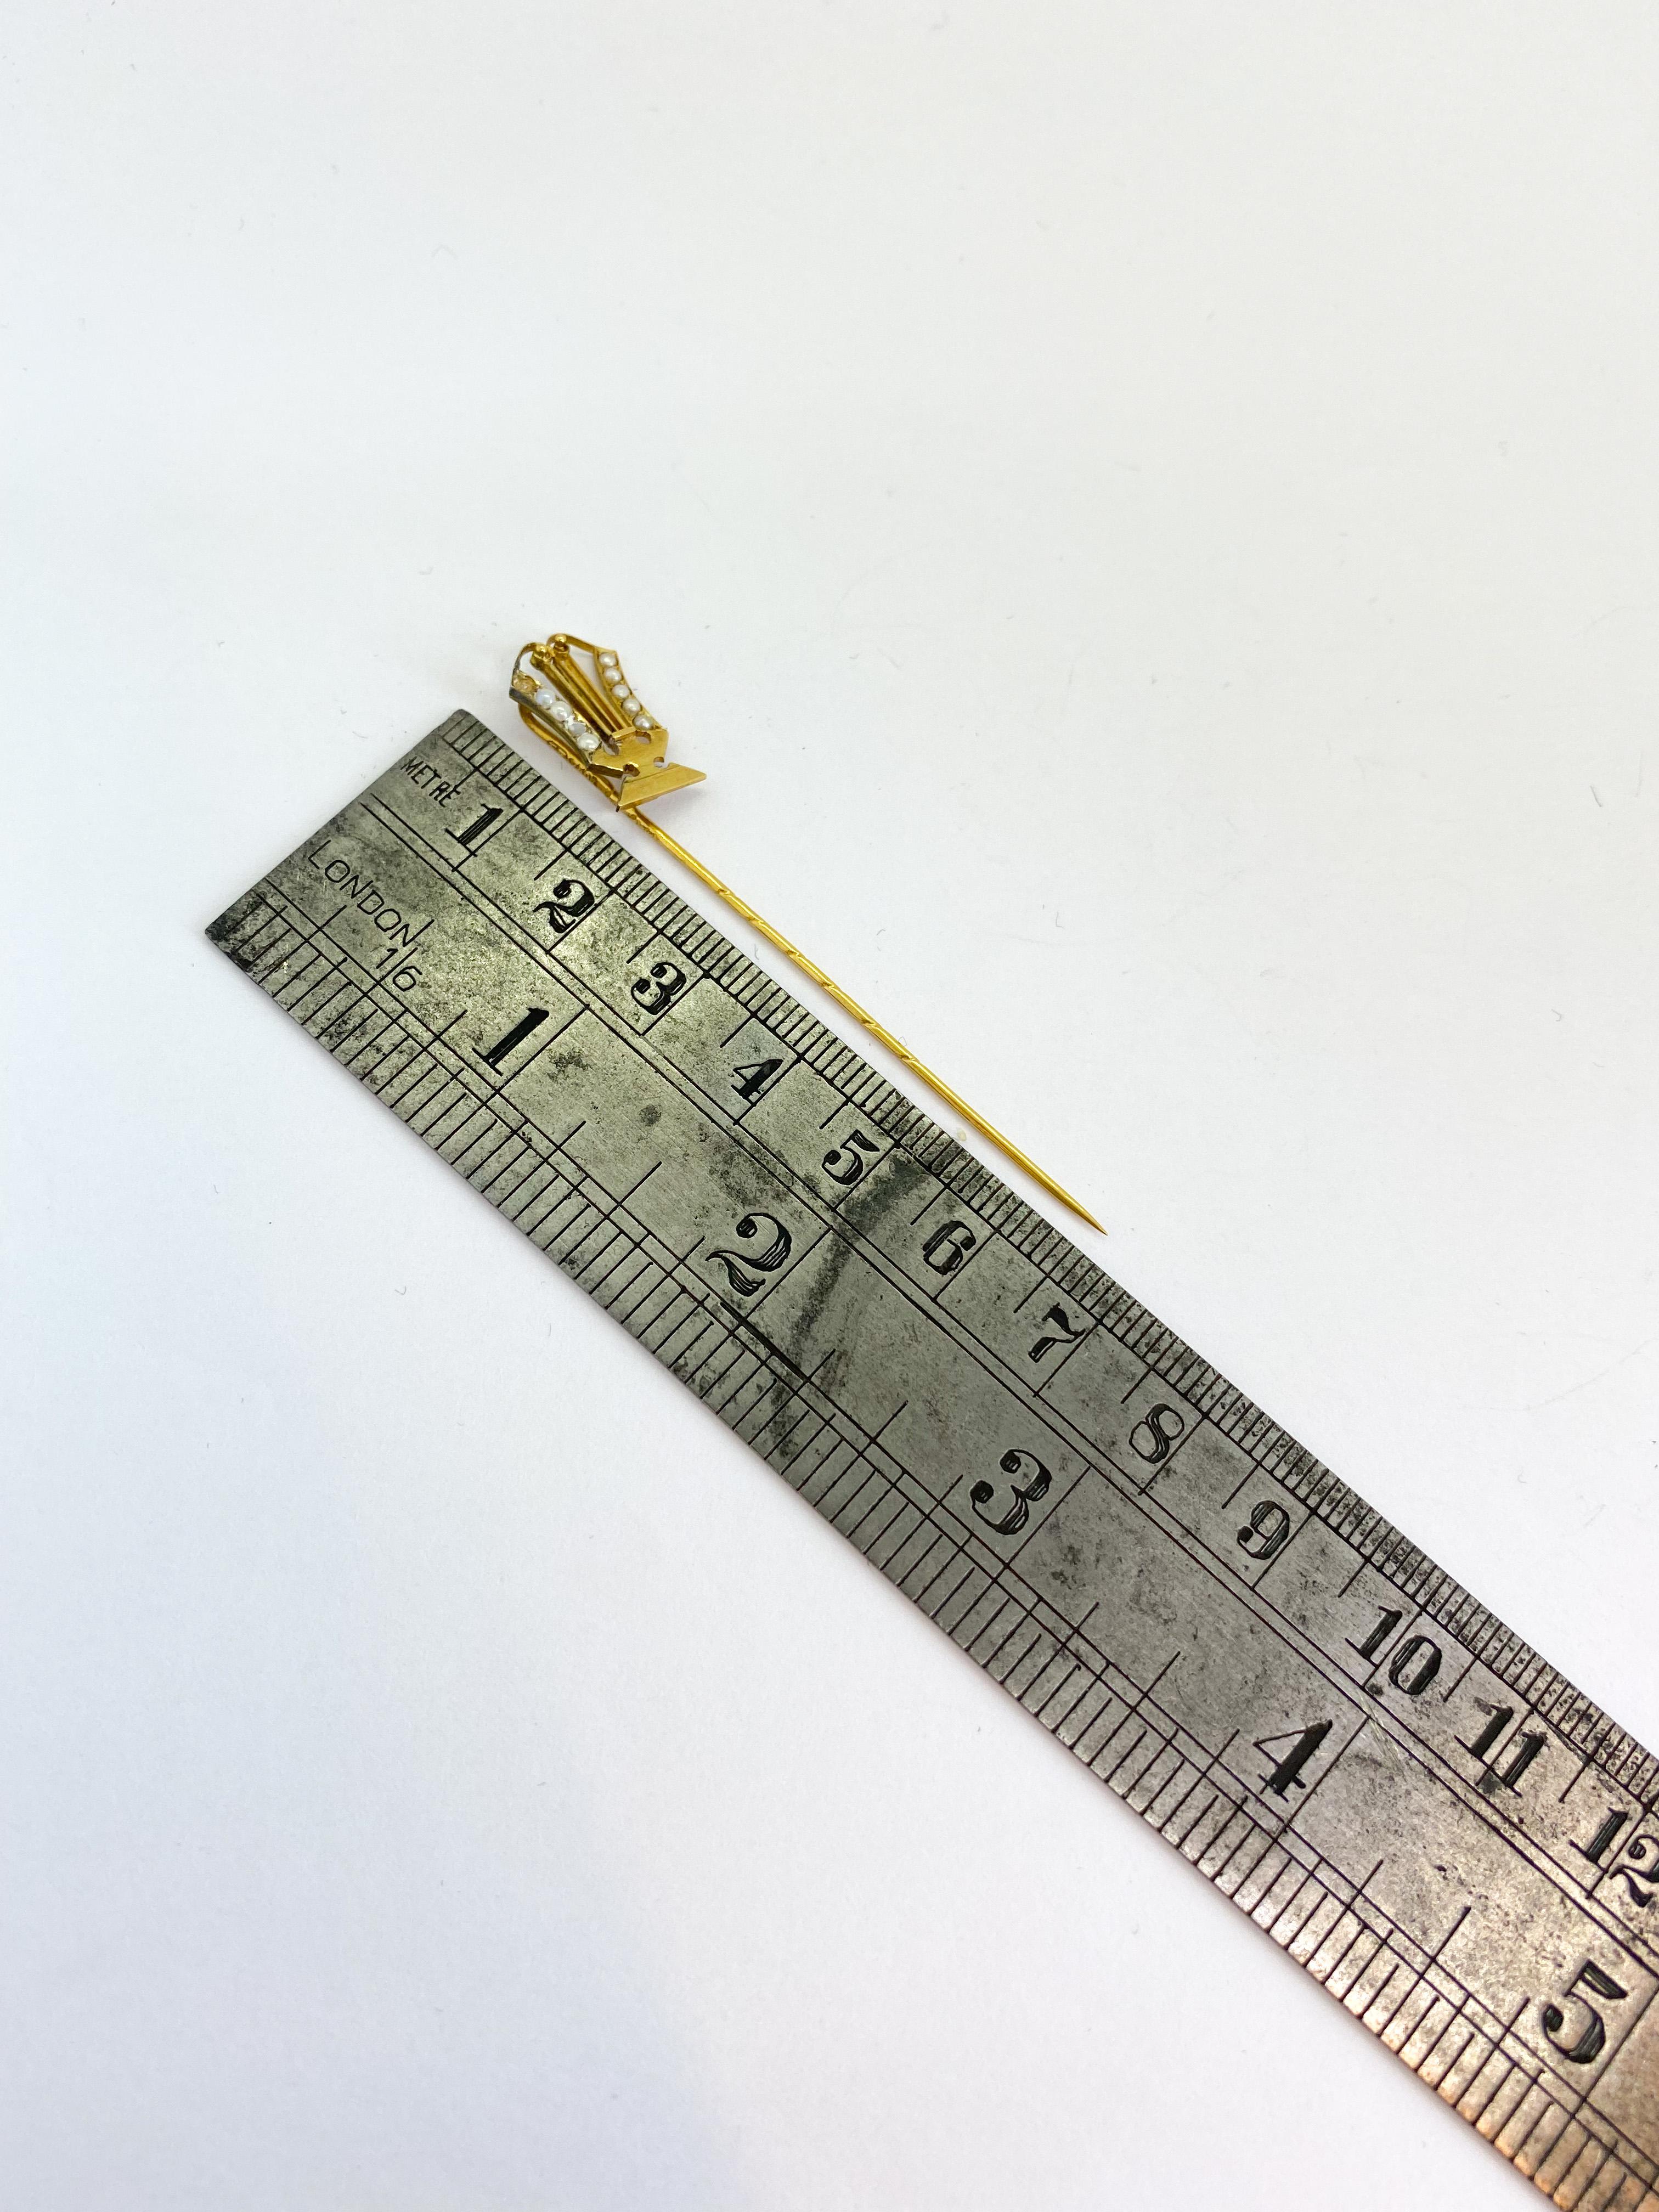 Stickpin 18 Karat Yellow Gold and Pearl
750 Gold stamp.
Possibly made in Helsinki.
Lots of stamps.
Checkmark Finland.